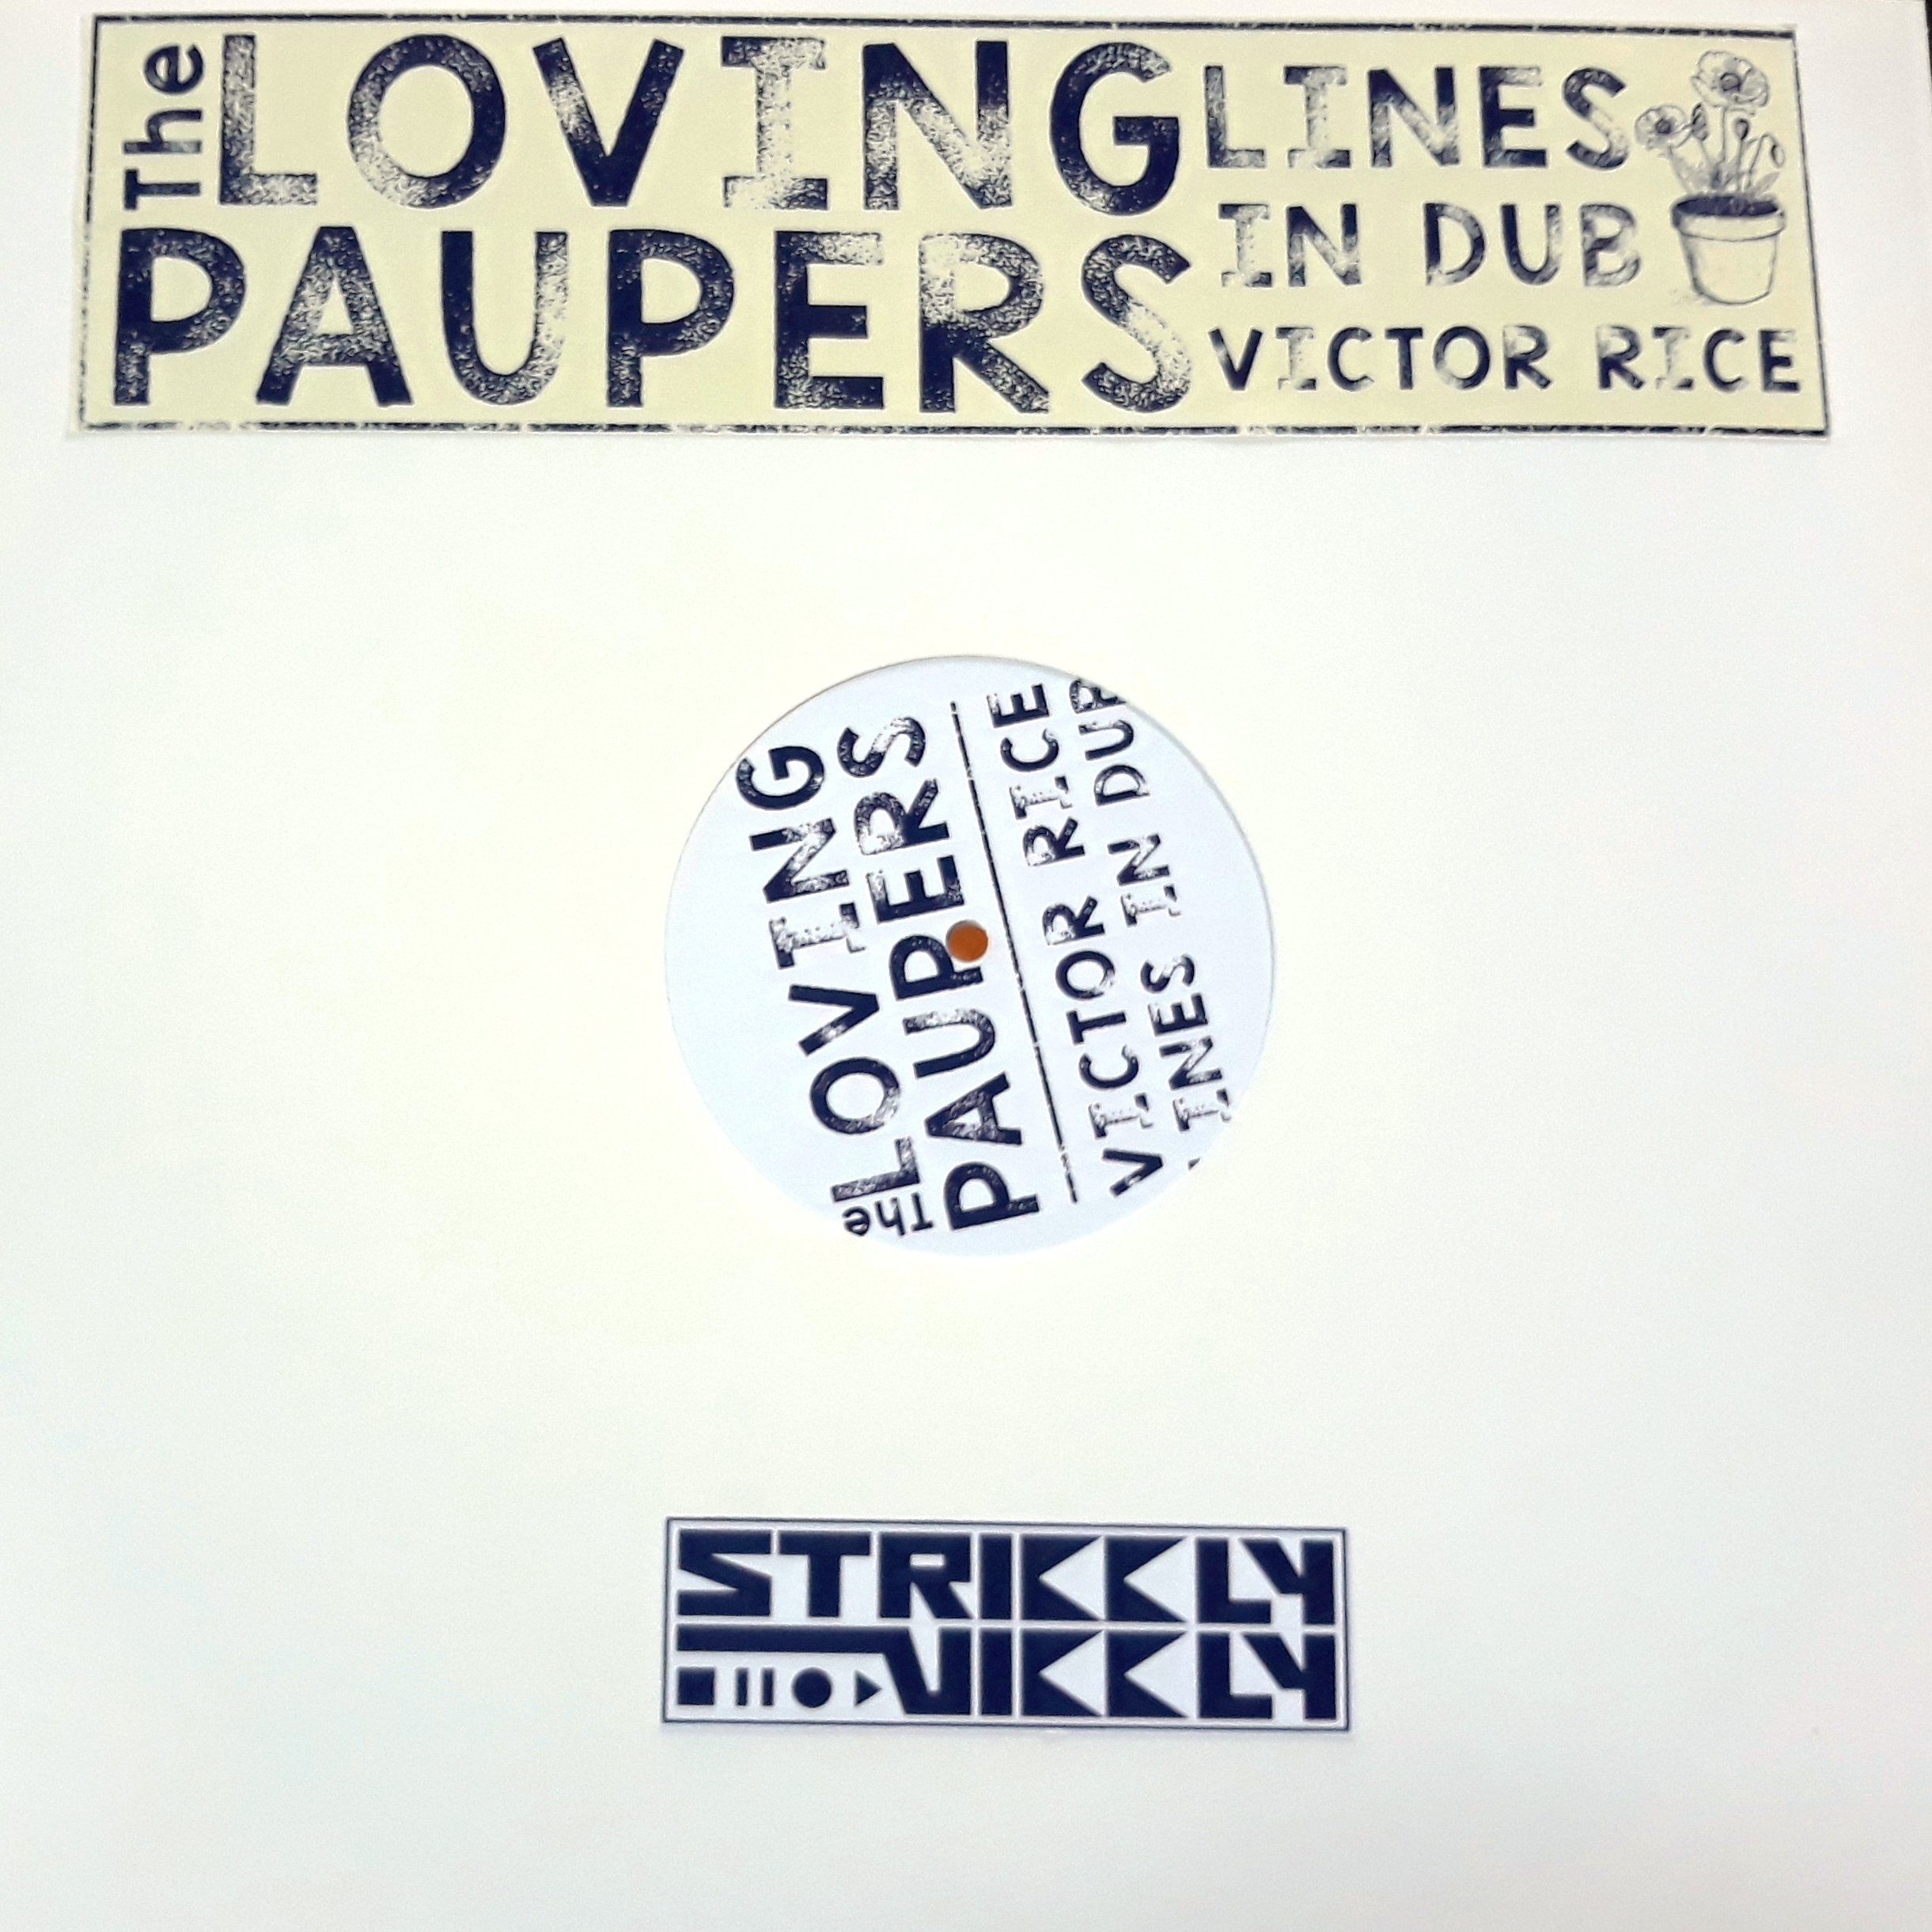 Loving Paupers/LINES IN DUB (V. RICE) LP